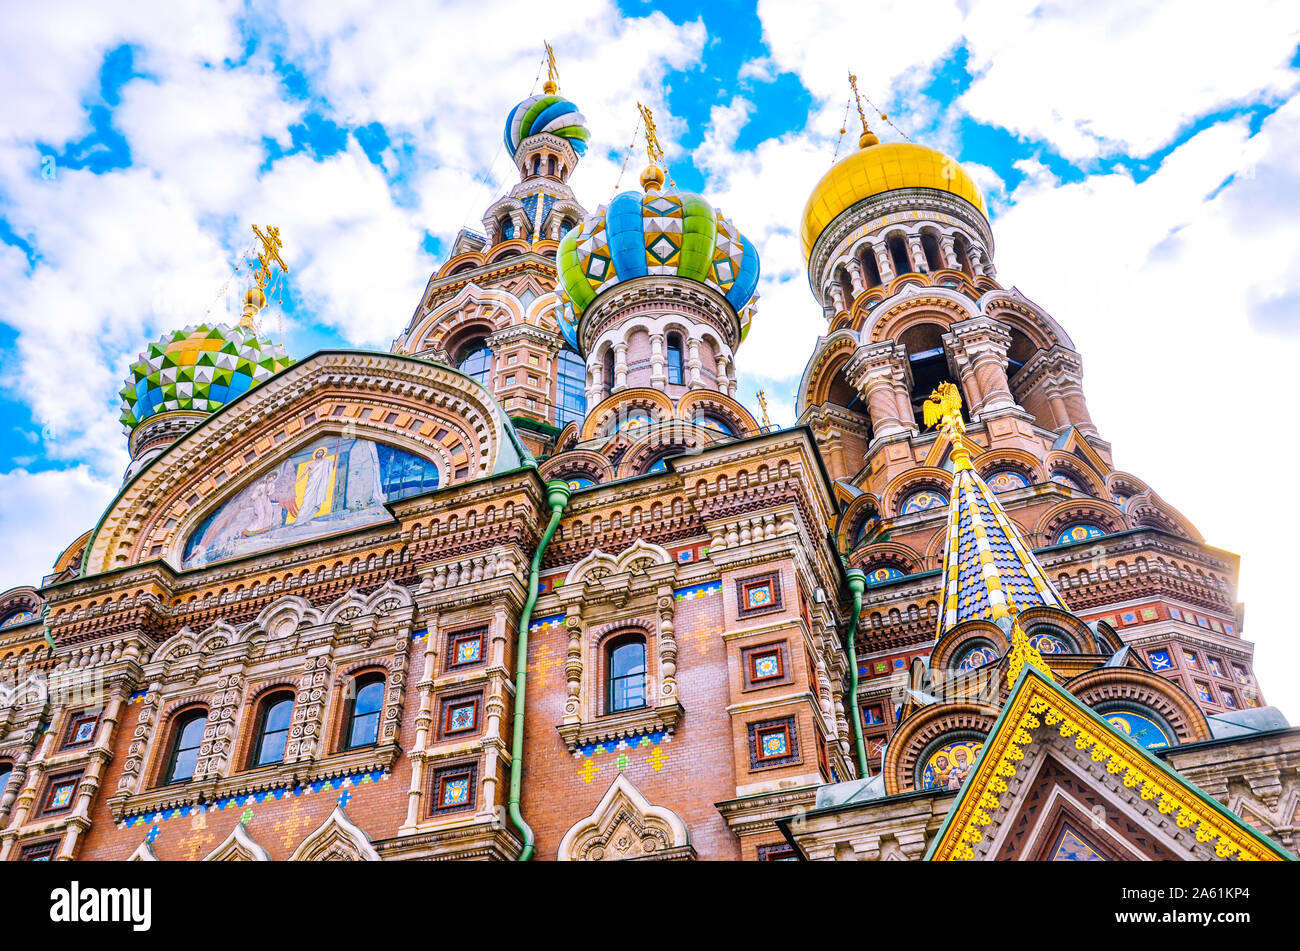 Detail of facade of the beautiful Church of the Savior on Blood, St. Petersburg, Russia. Colorful richly decorated facade and onion domes. One of major Russian tourist attractions. Orthodox church. Stock Photo